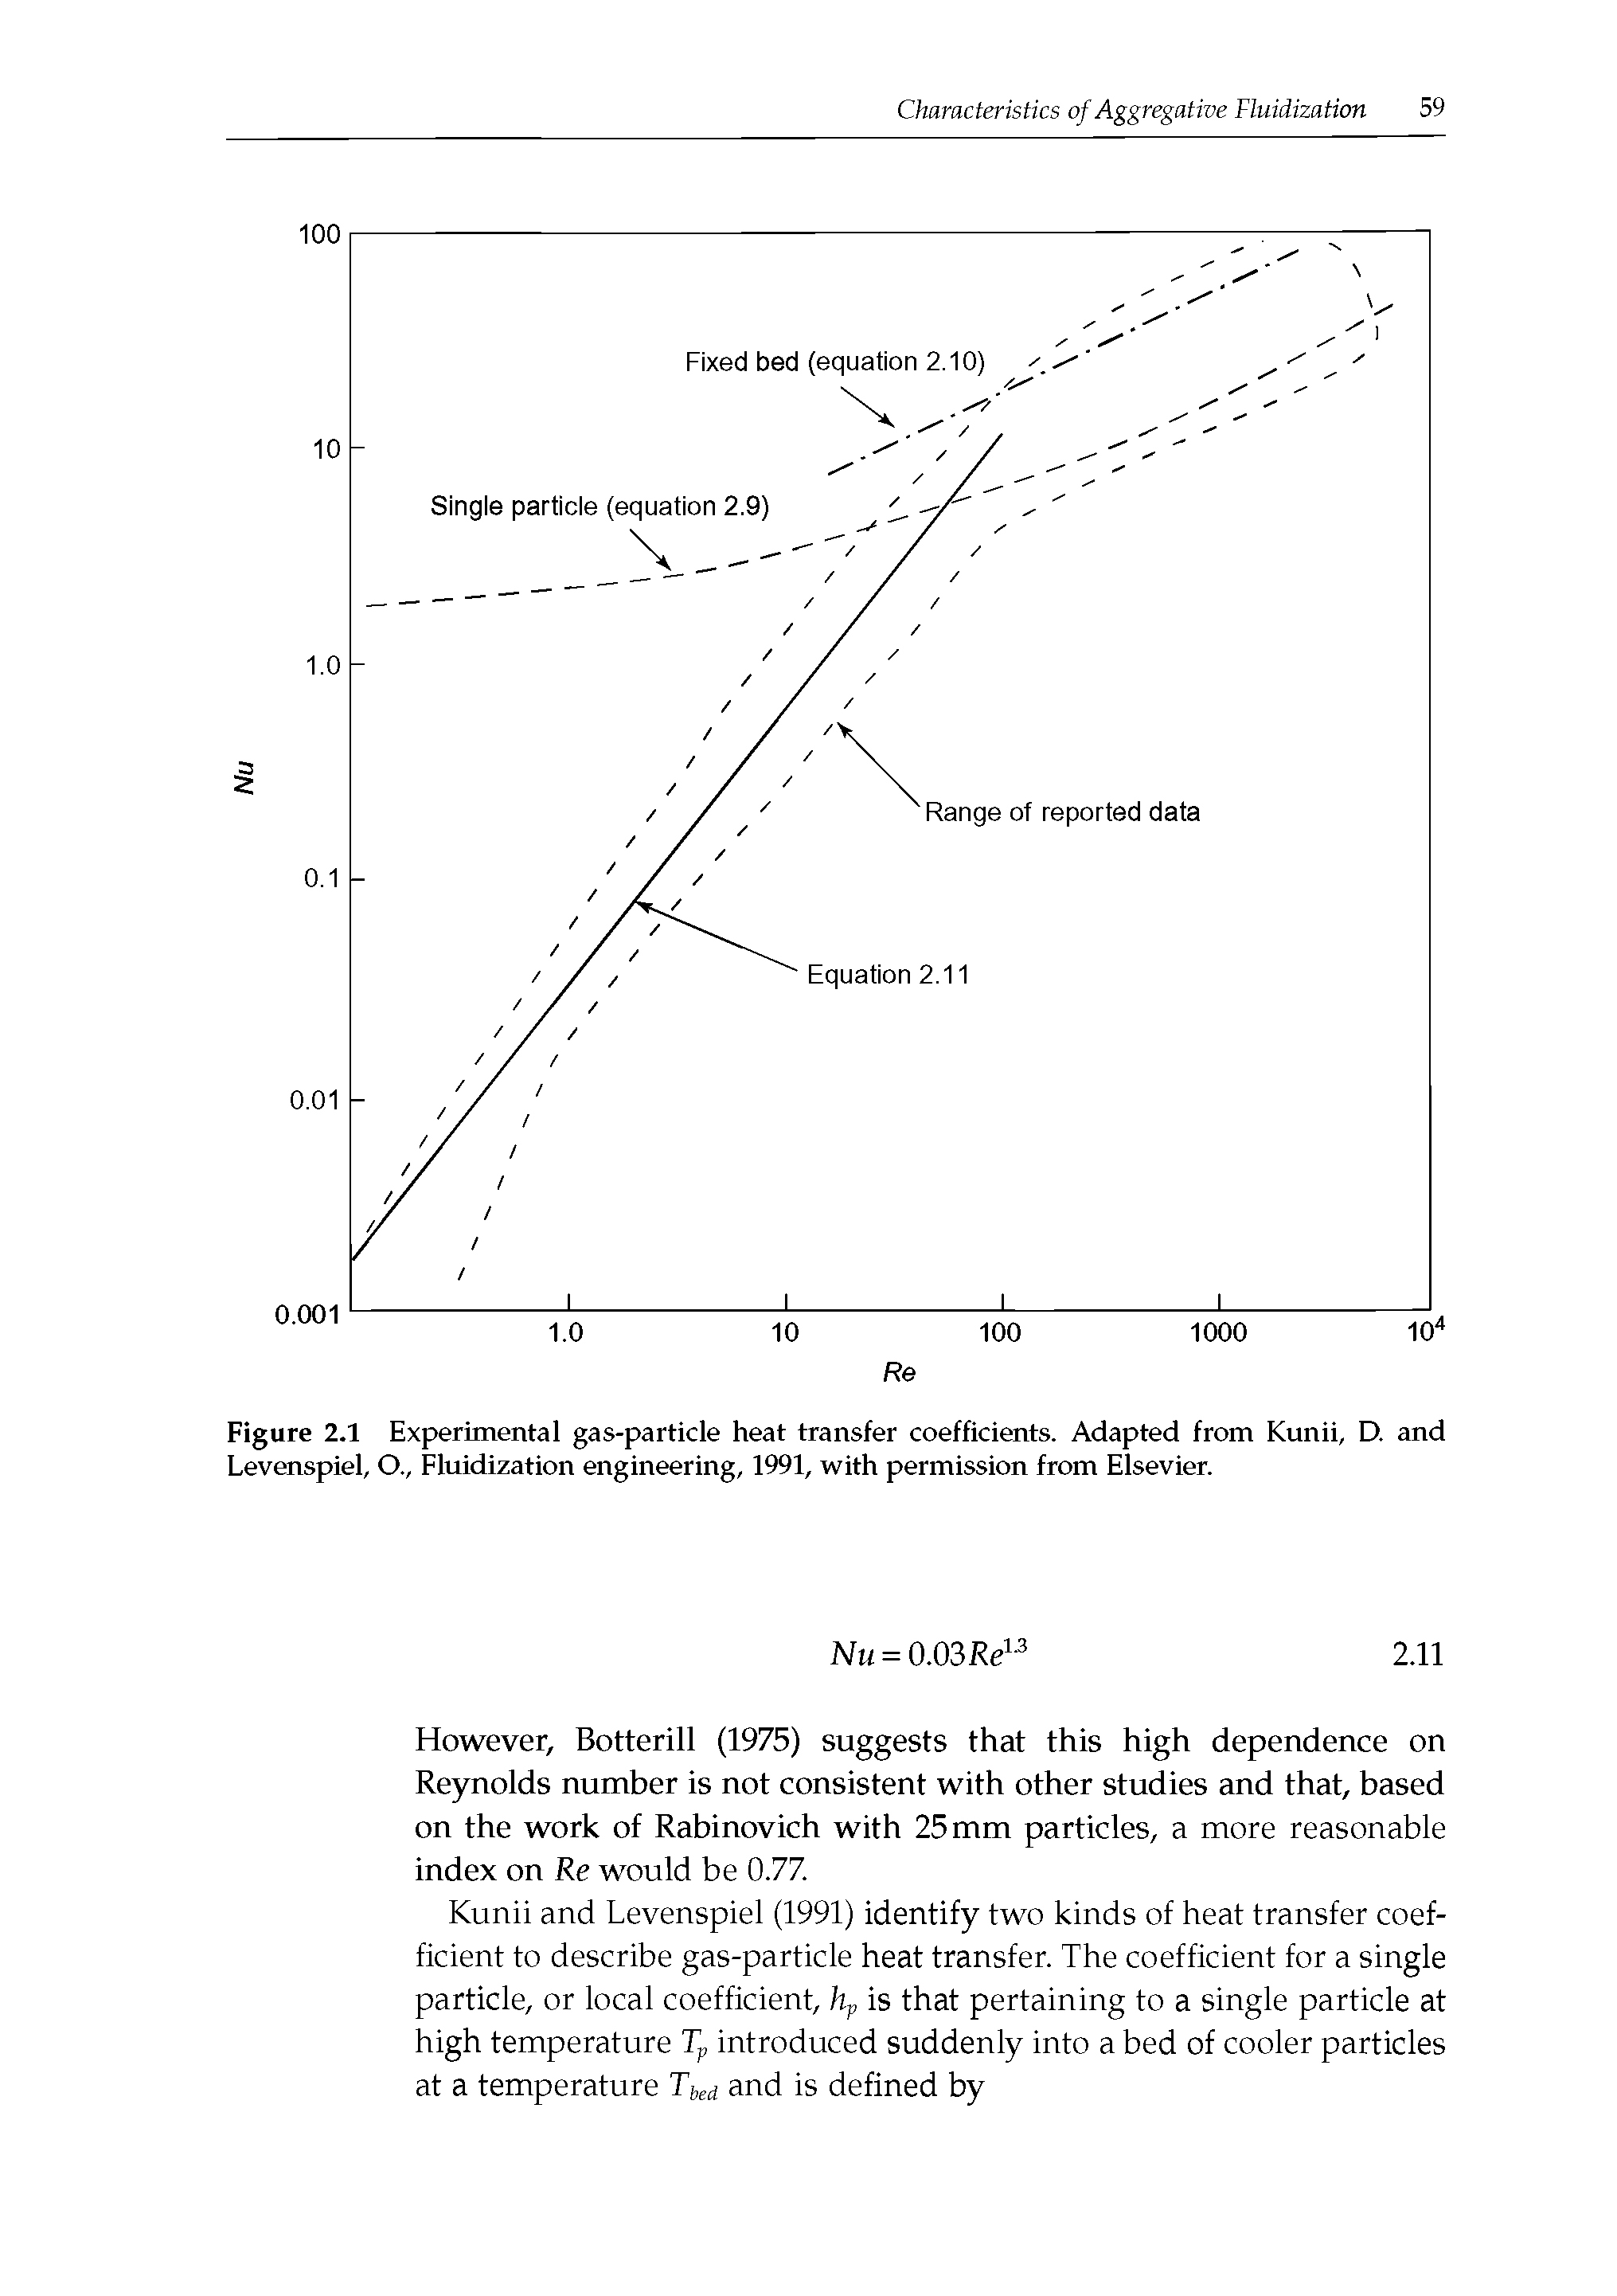 Figure 2.1 Experimental gas-particle heat transfer coefficients. Adapted from Kunii, D. and Levenspiel, O., Fluidization engineering, 1991, with permission from Elsevier.